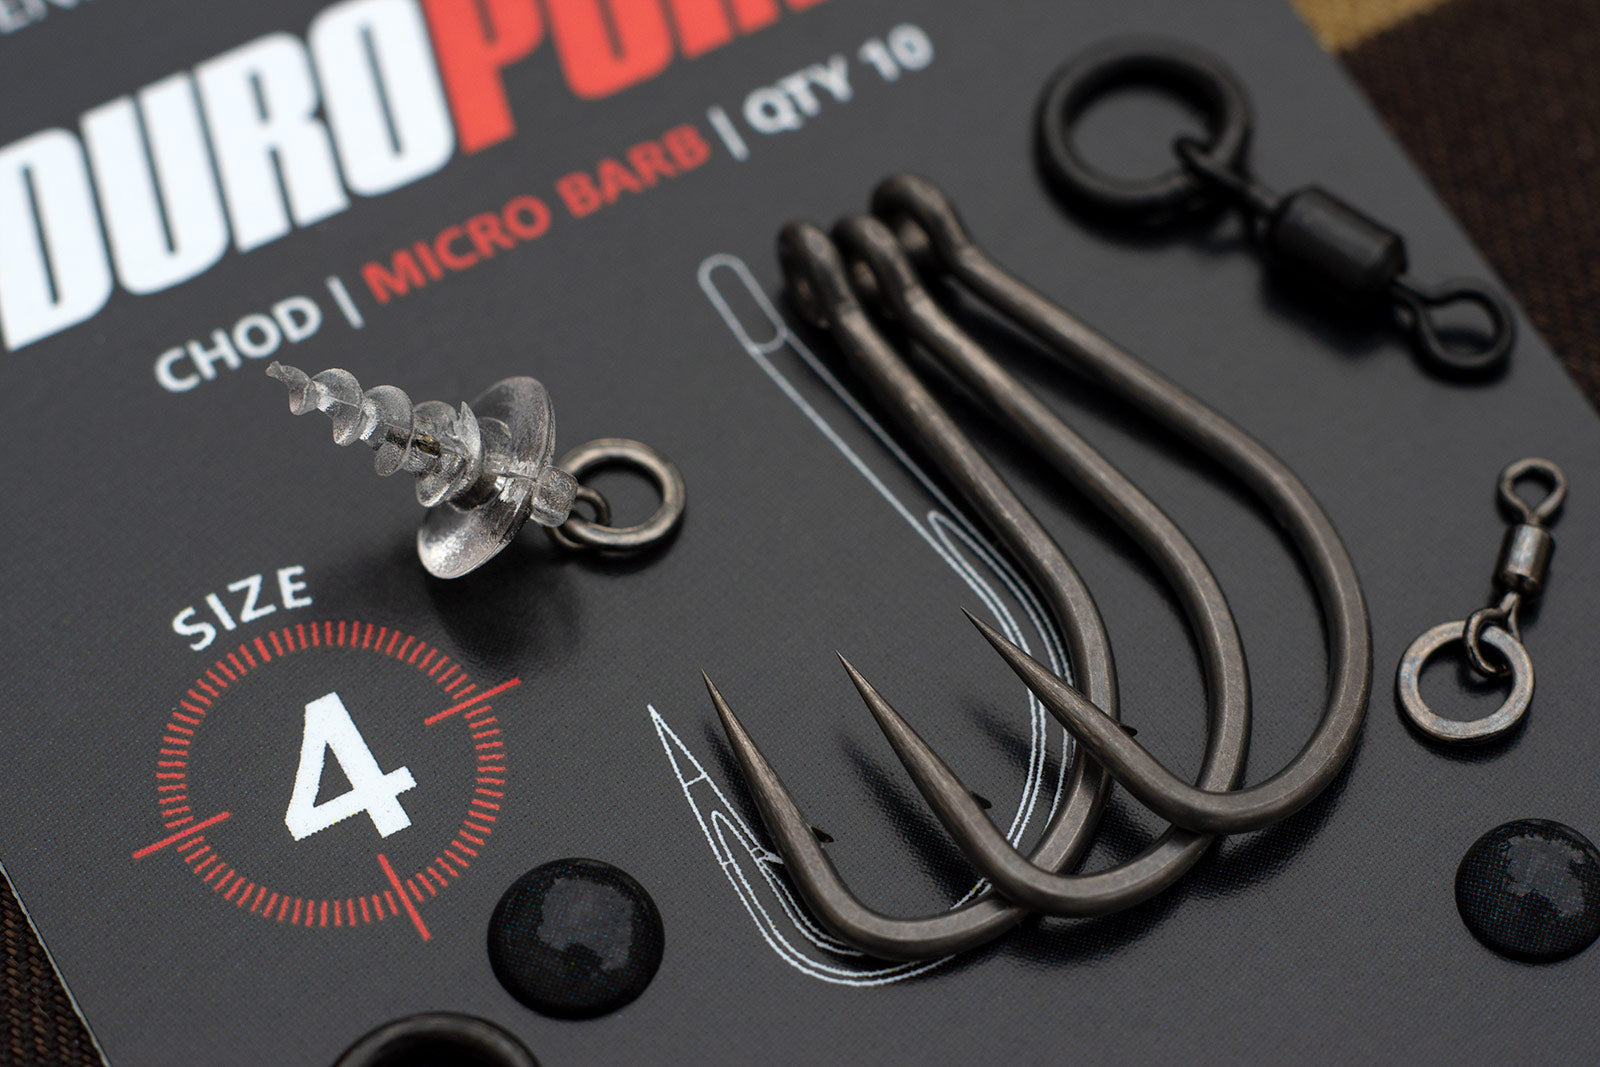 Duropoint Chod hooks are brilliantly suited to the Clone Rig.